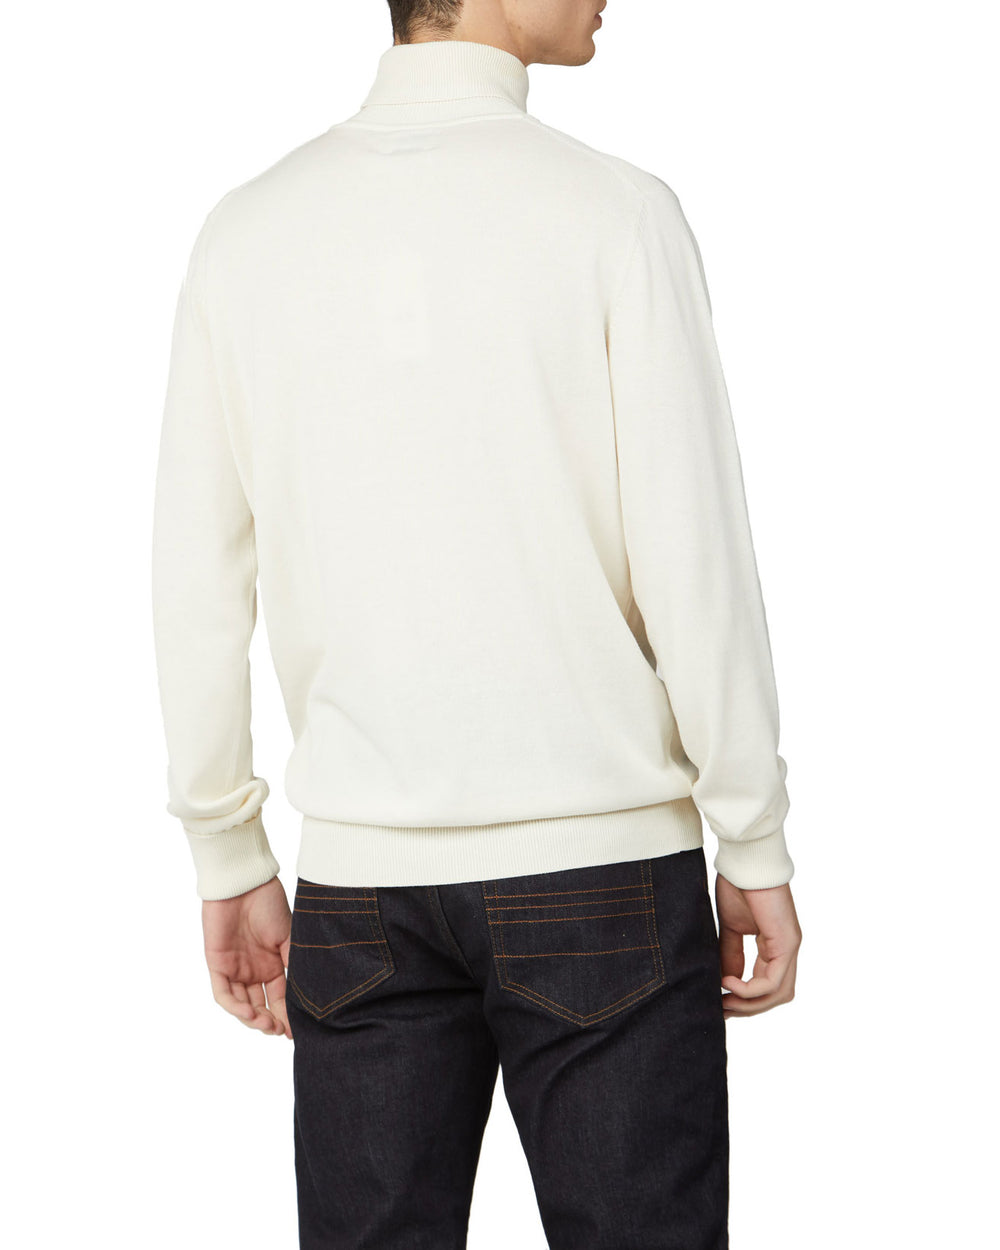 Signature Cotton Roll Neck Sweater - Ivory